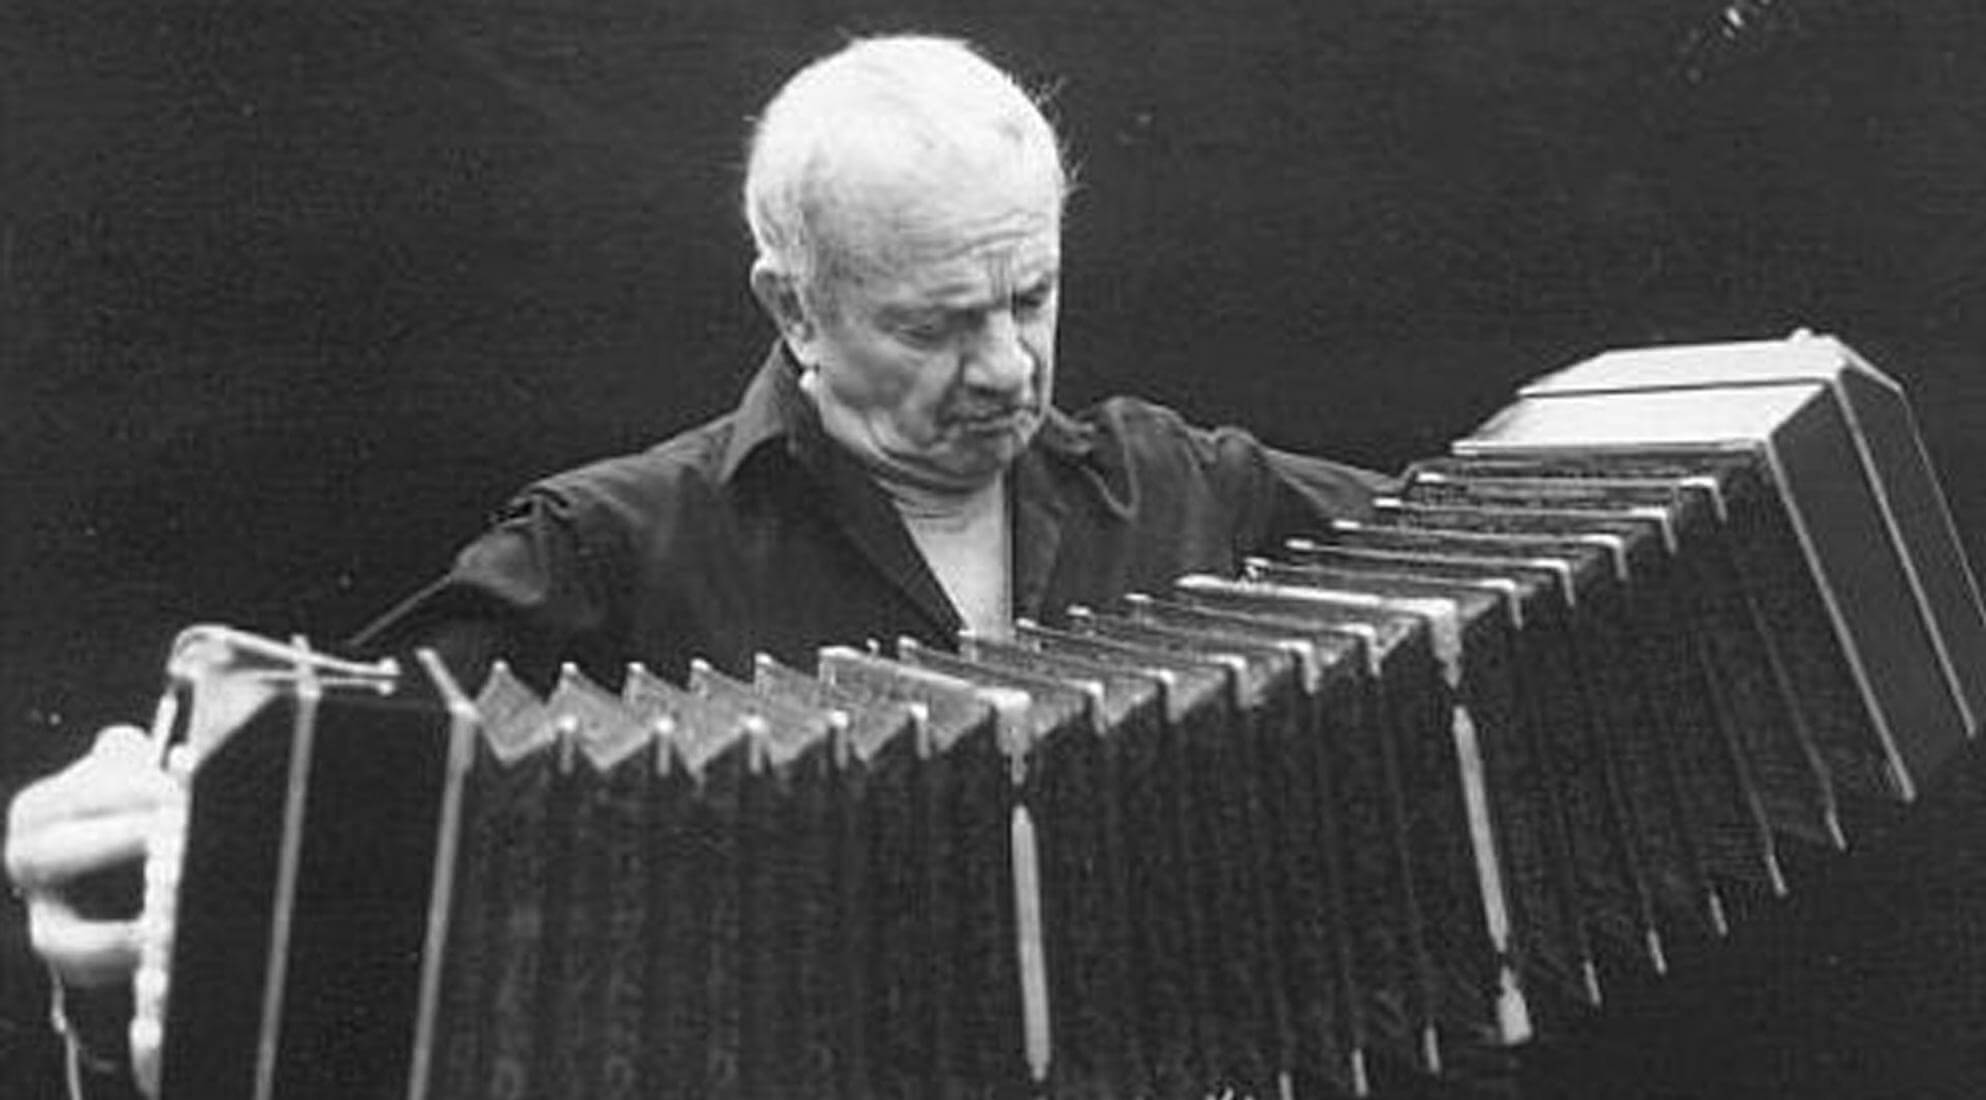 Astor Piazzolla Biography - Argentine Composer and Virtuosic Bandoneón Player